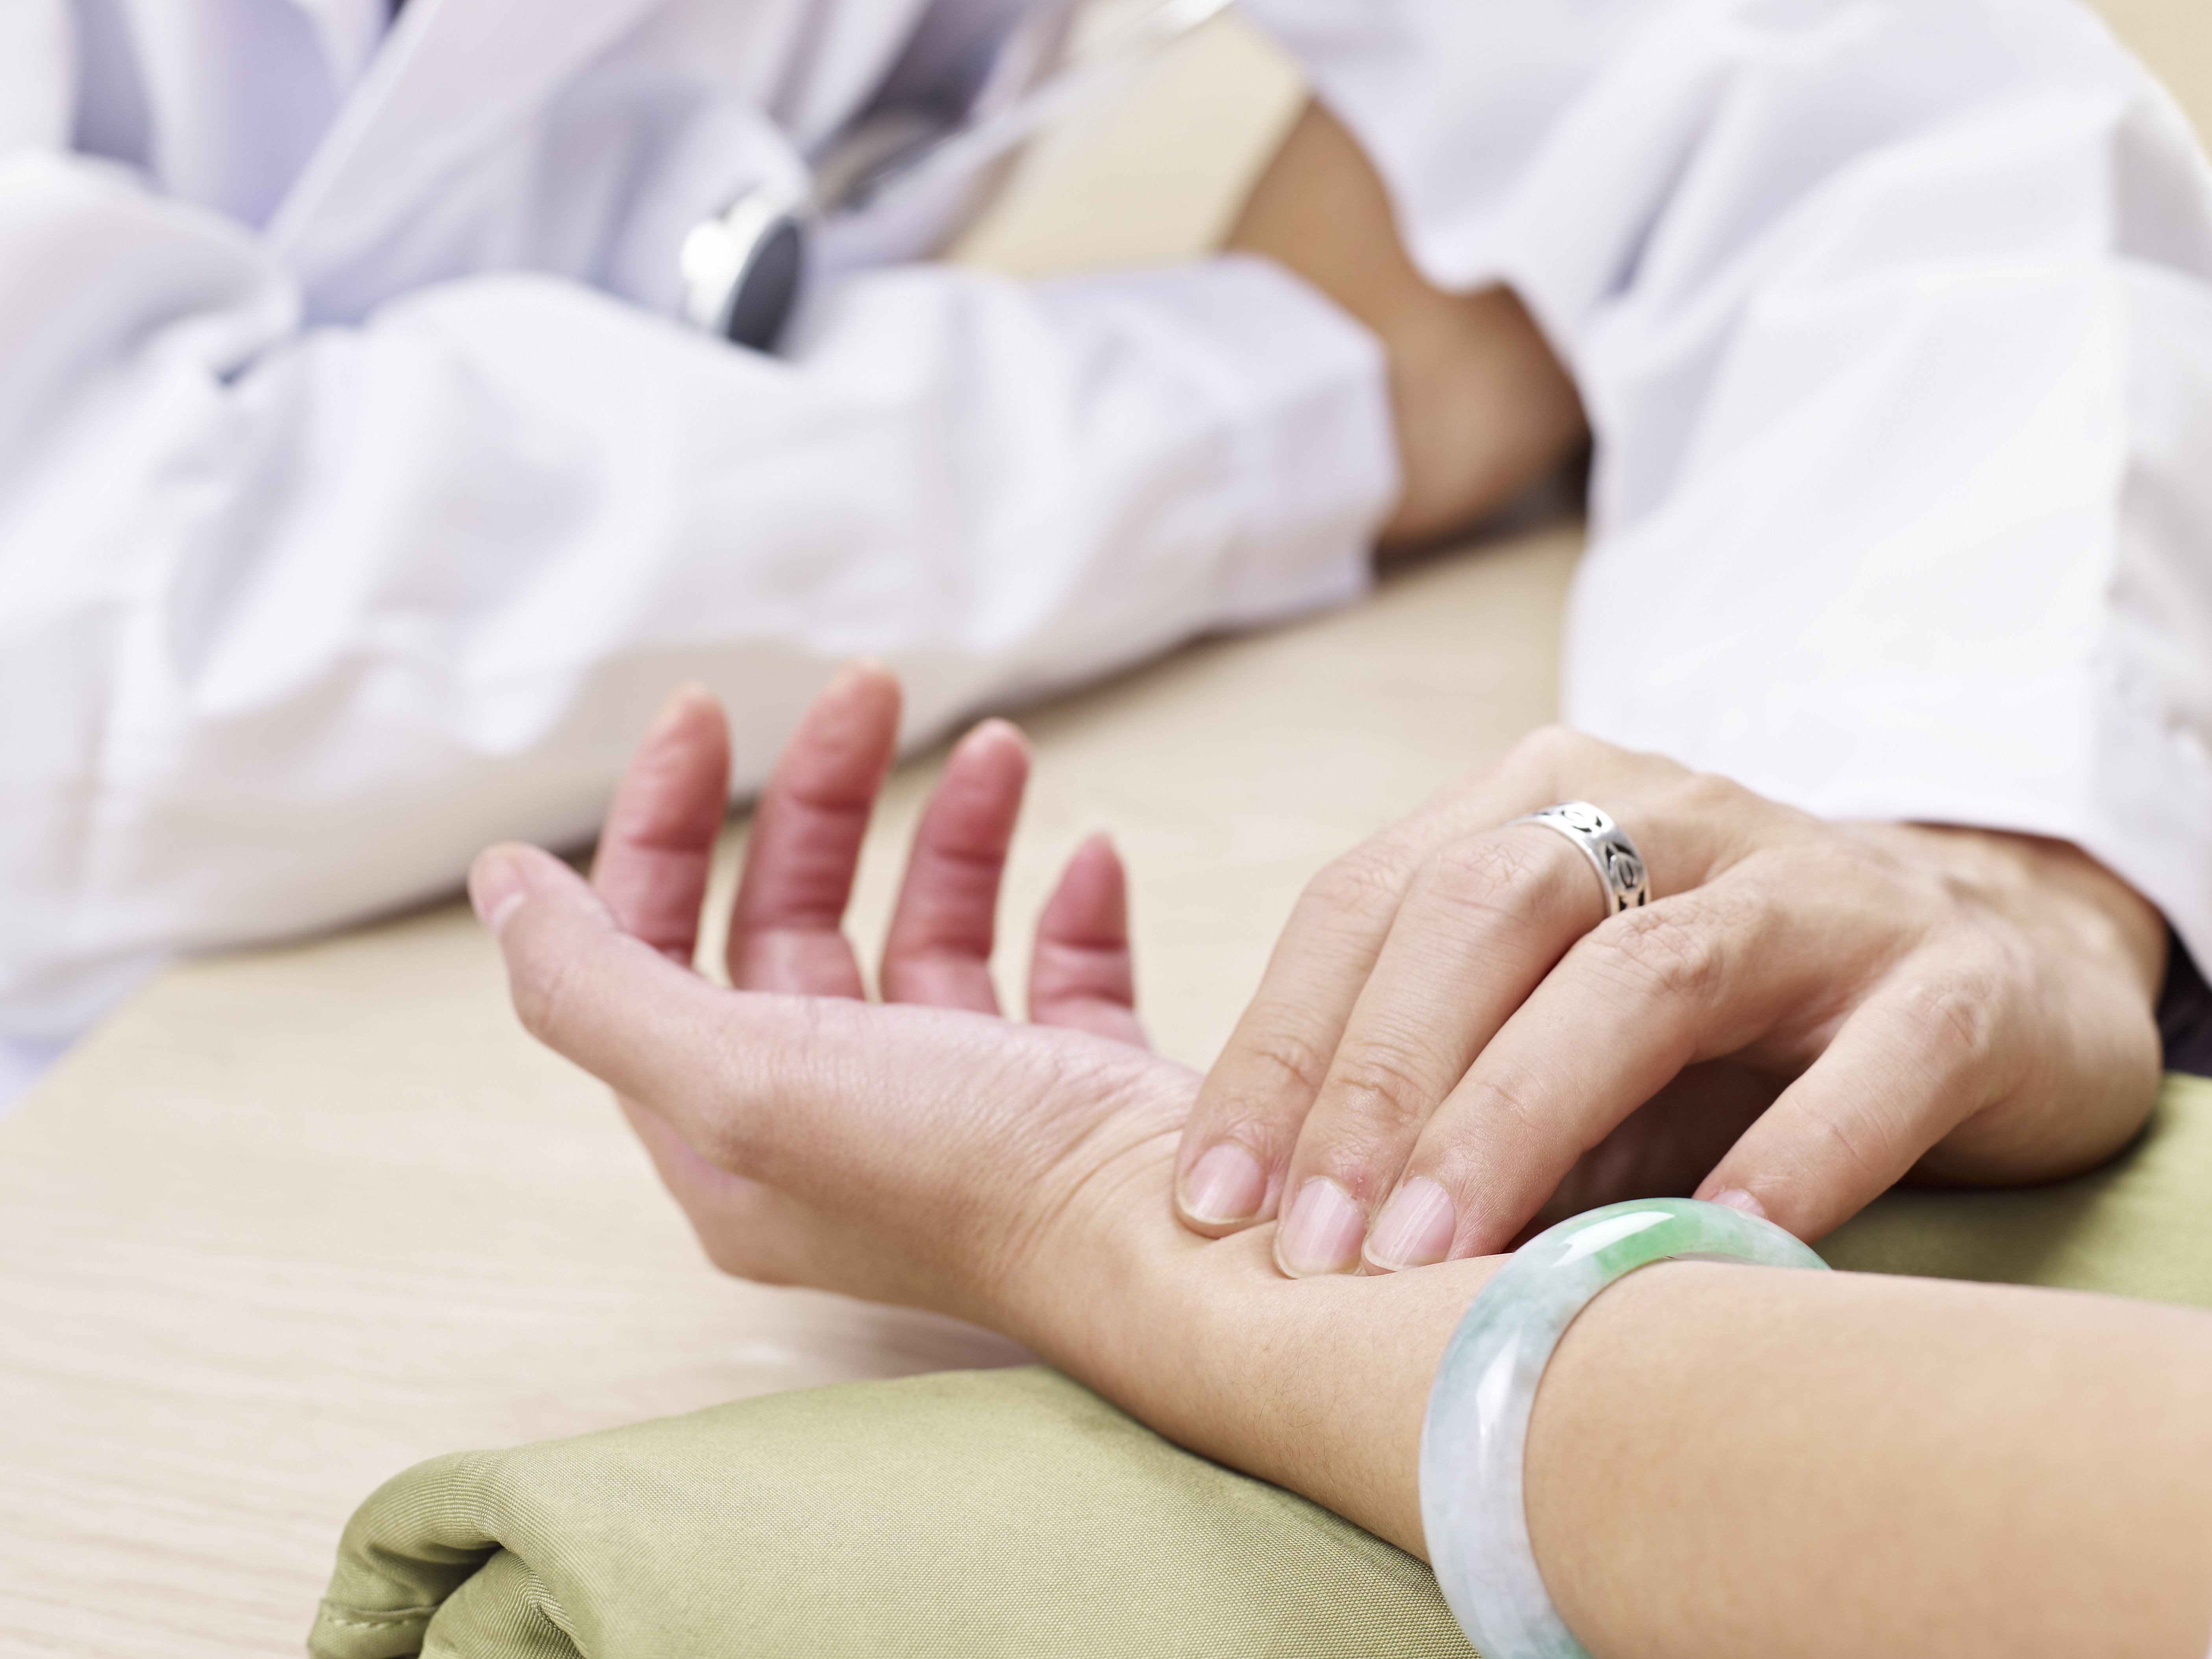 Haining Liu says patients lack care and comfort while doctors miss trust and respect. Photo: Shutterstock